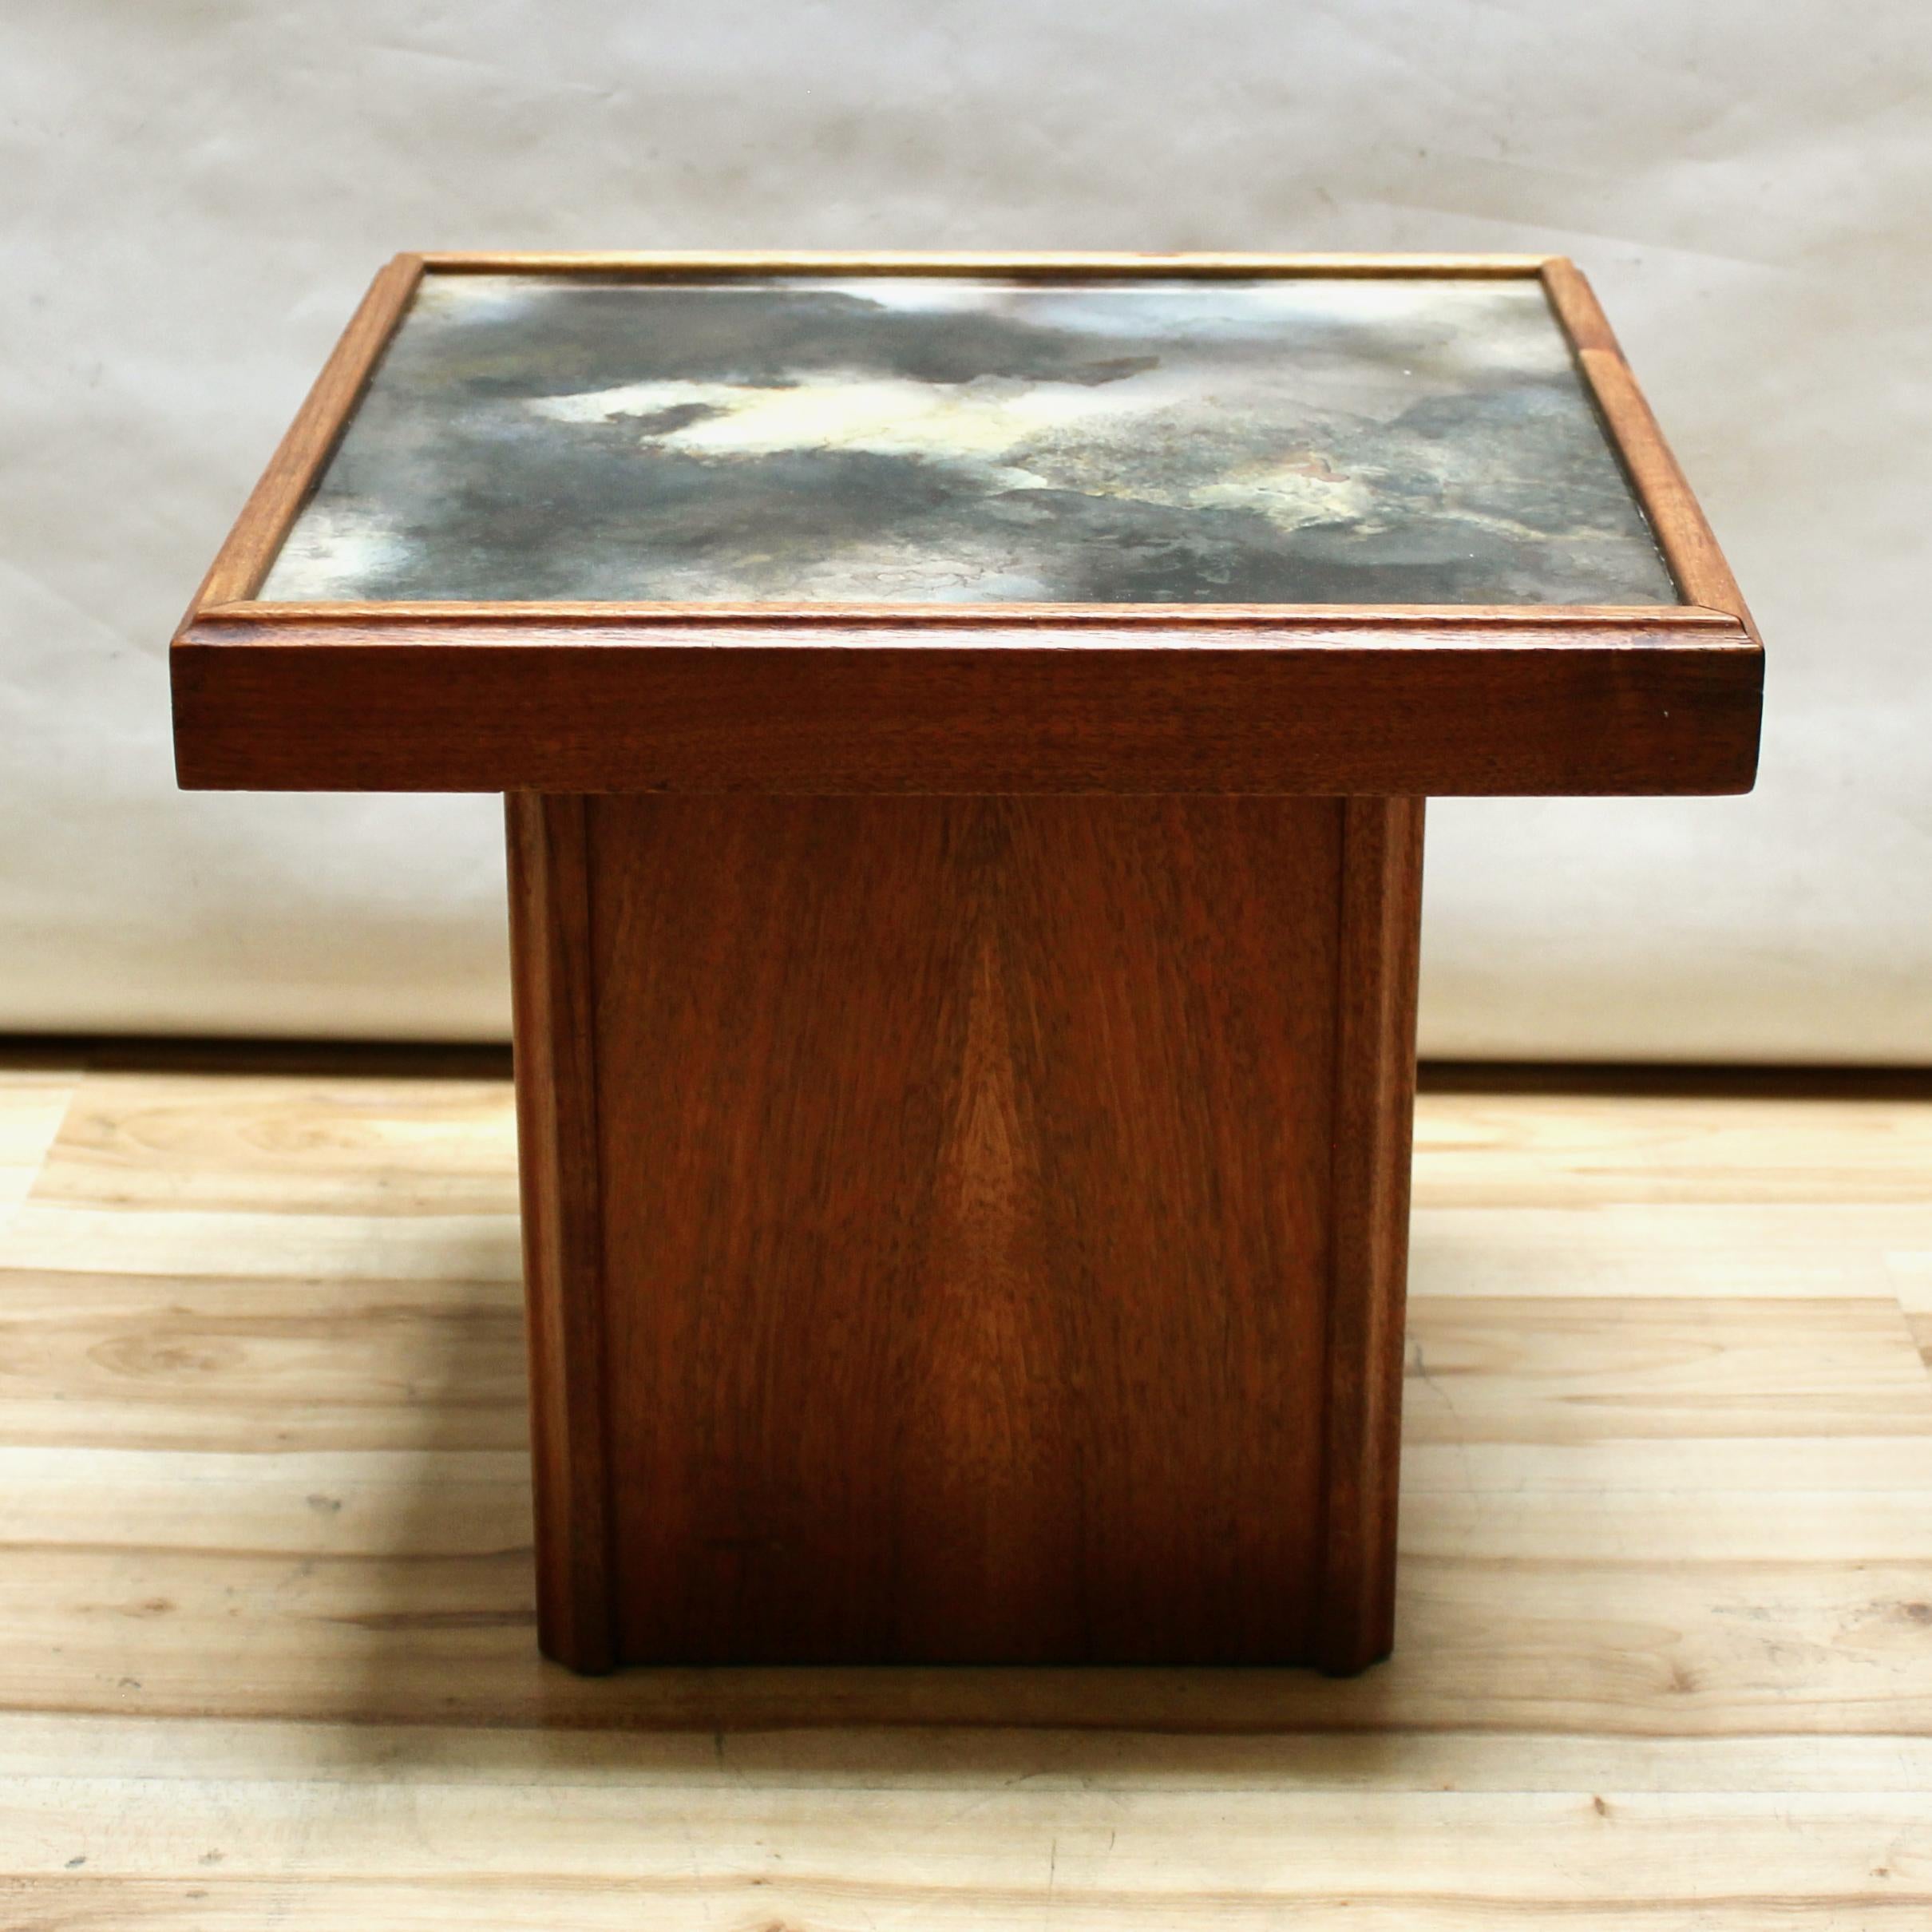 Mid-Century Modern walnut and glass pedestal end table by John Keal for Brown Saltman. The table has an oxidized pattern in the glass top. In excellent condition.

Measures: width: 17.25 in / depth: 17.25 in / height: 15.5 in.